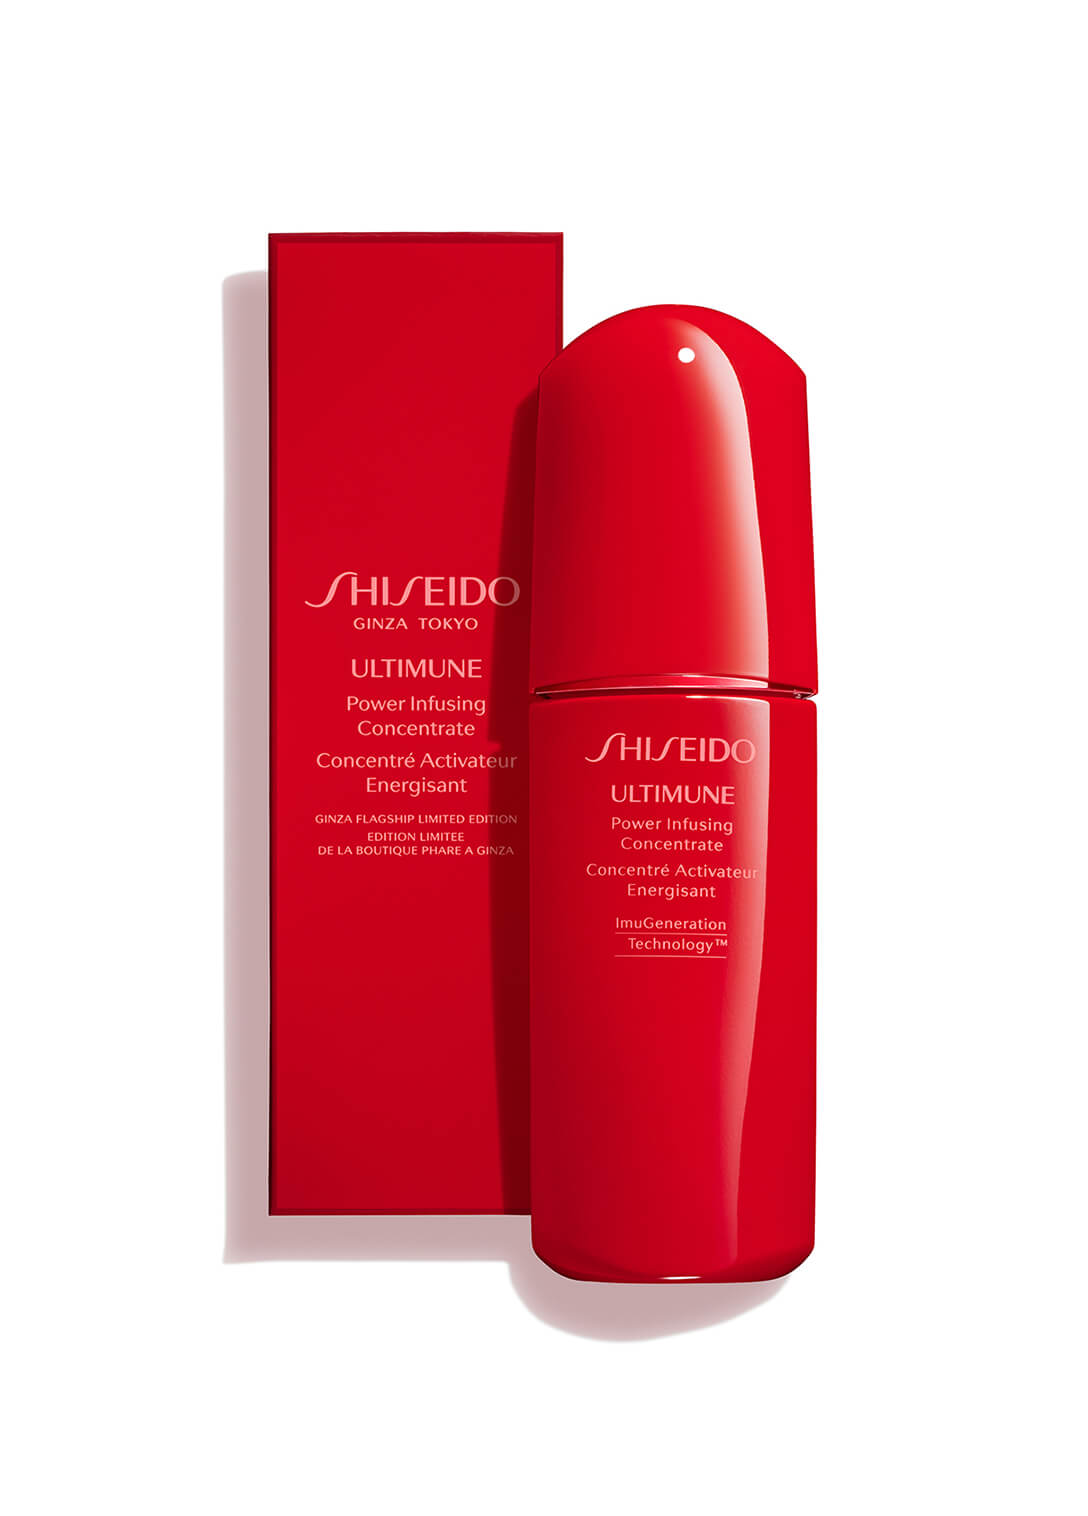 04 Discover Every SHISEIDO Product—and Some Exclusives